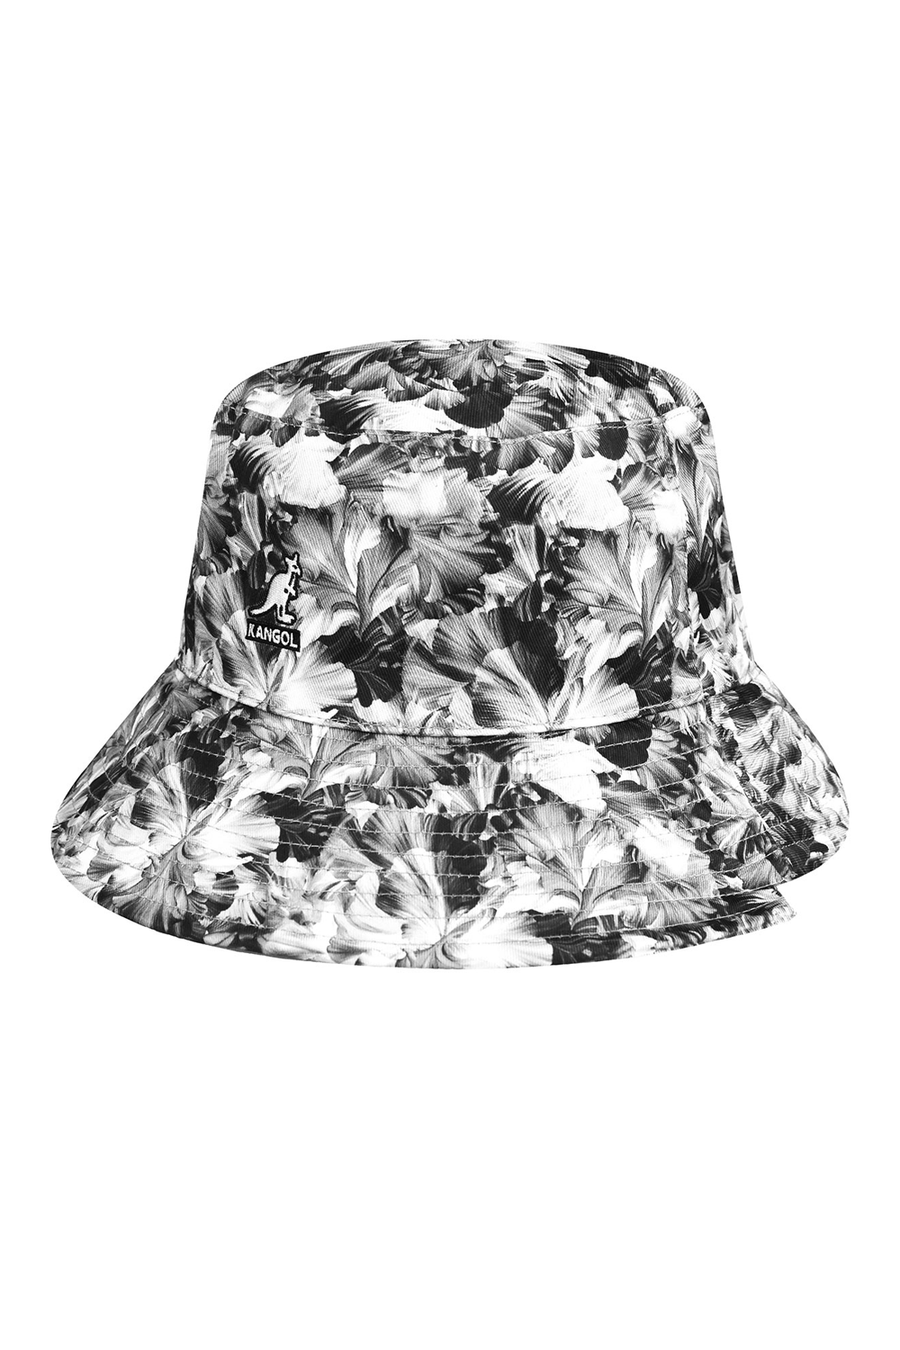 Buy the Kangol Floral Reversible Bucket Hat in Black at Intro. Spend £50 for free UK delivery. Official stockists. We ship worldwide.